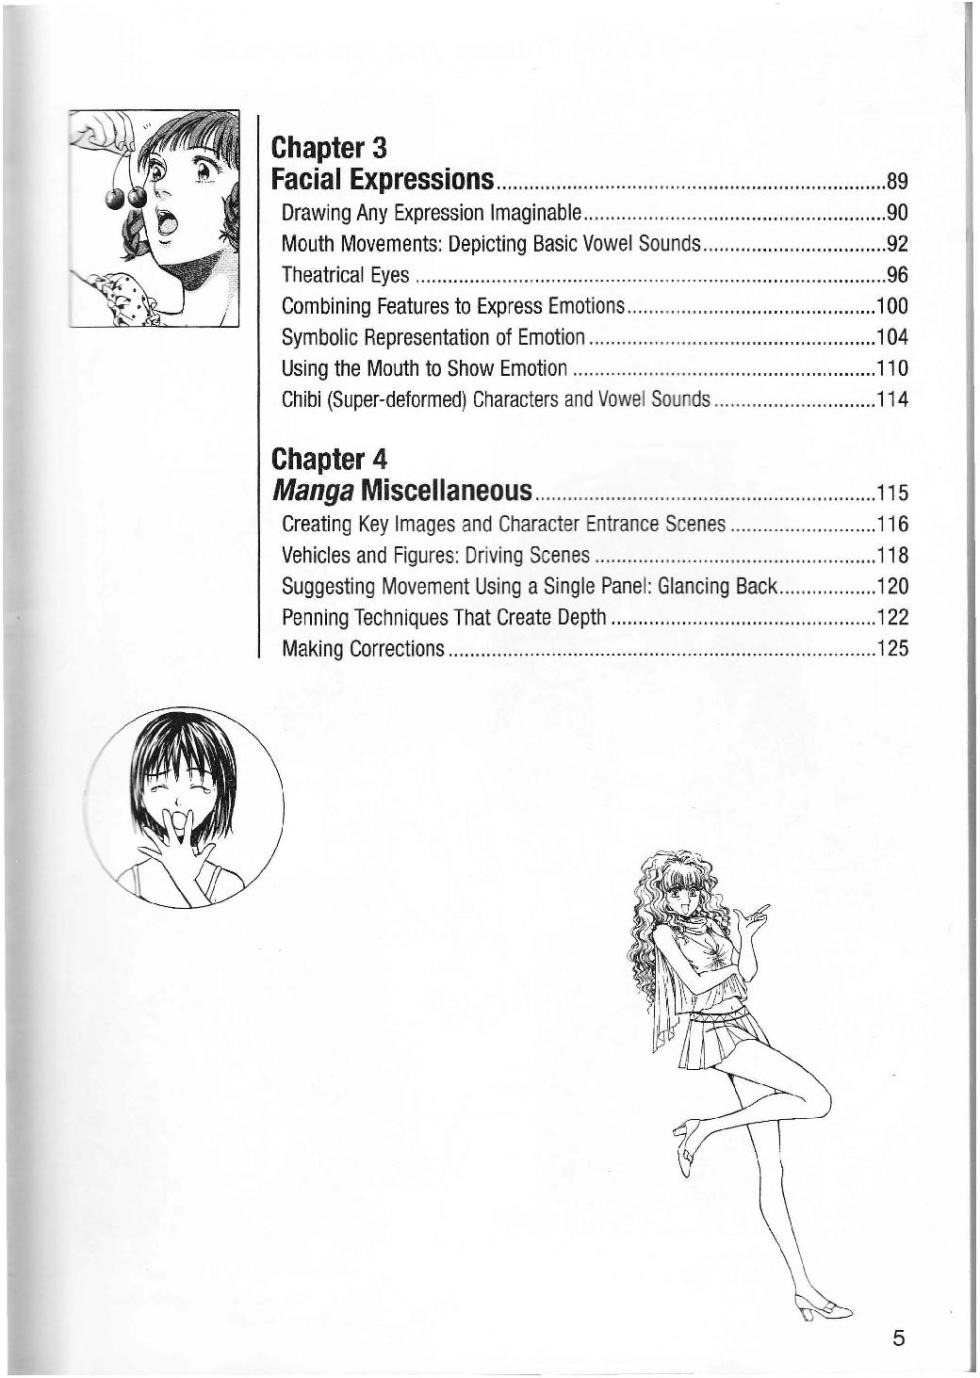 More How to Draw Manga Vol. 2 - Penning Characters - Page 7